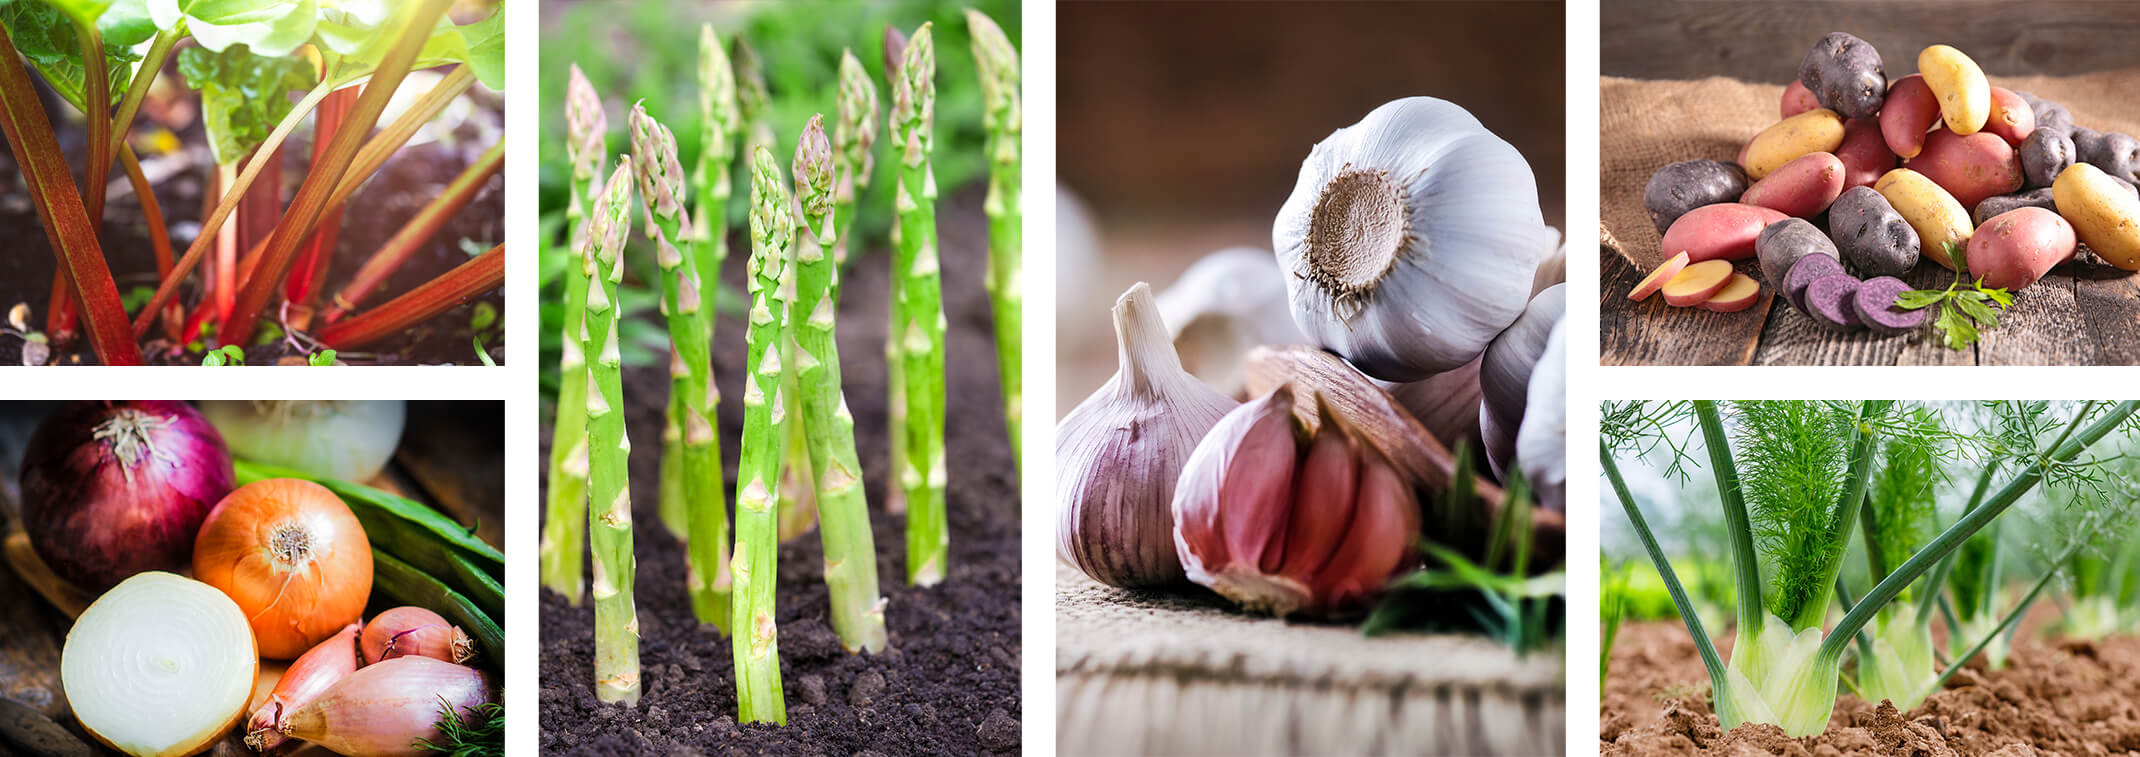 6 images: Rhubarb; onions, shallots and scallions; garlic; potatoes; and bulb fennel